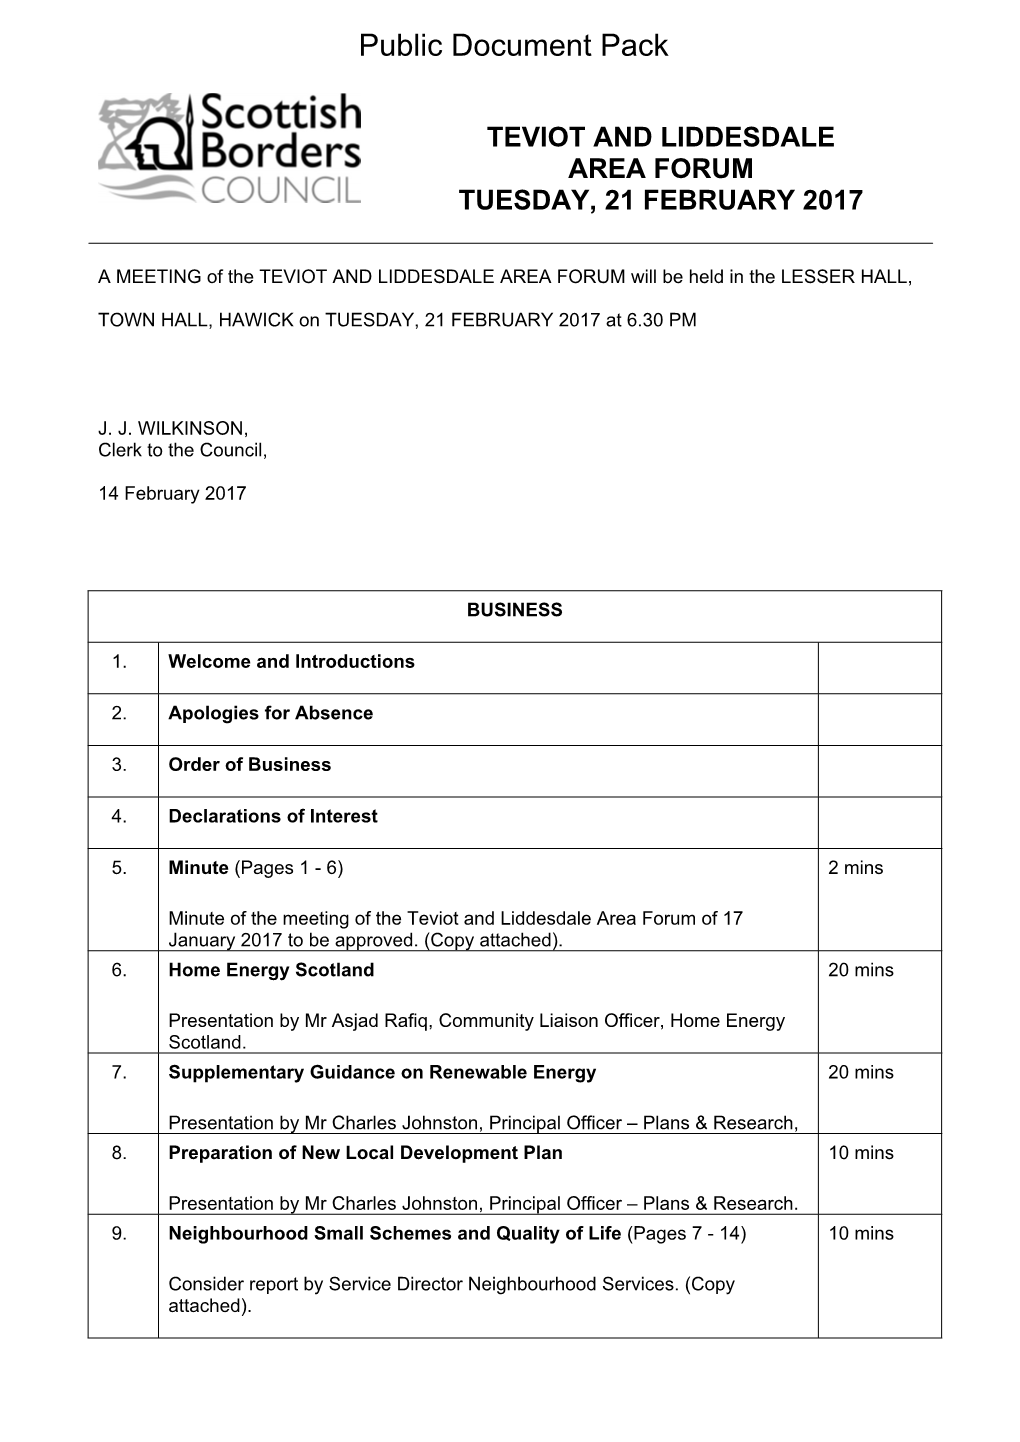 (Public Pack)Agenda Document for Teviot and Liddesdale Area Forum